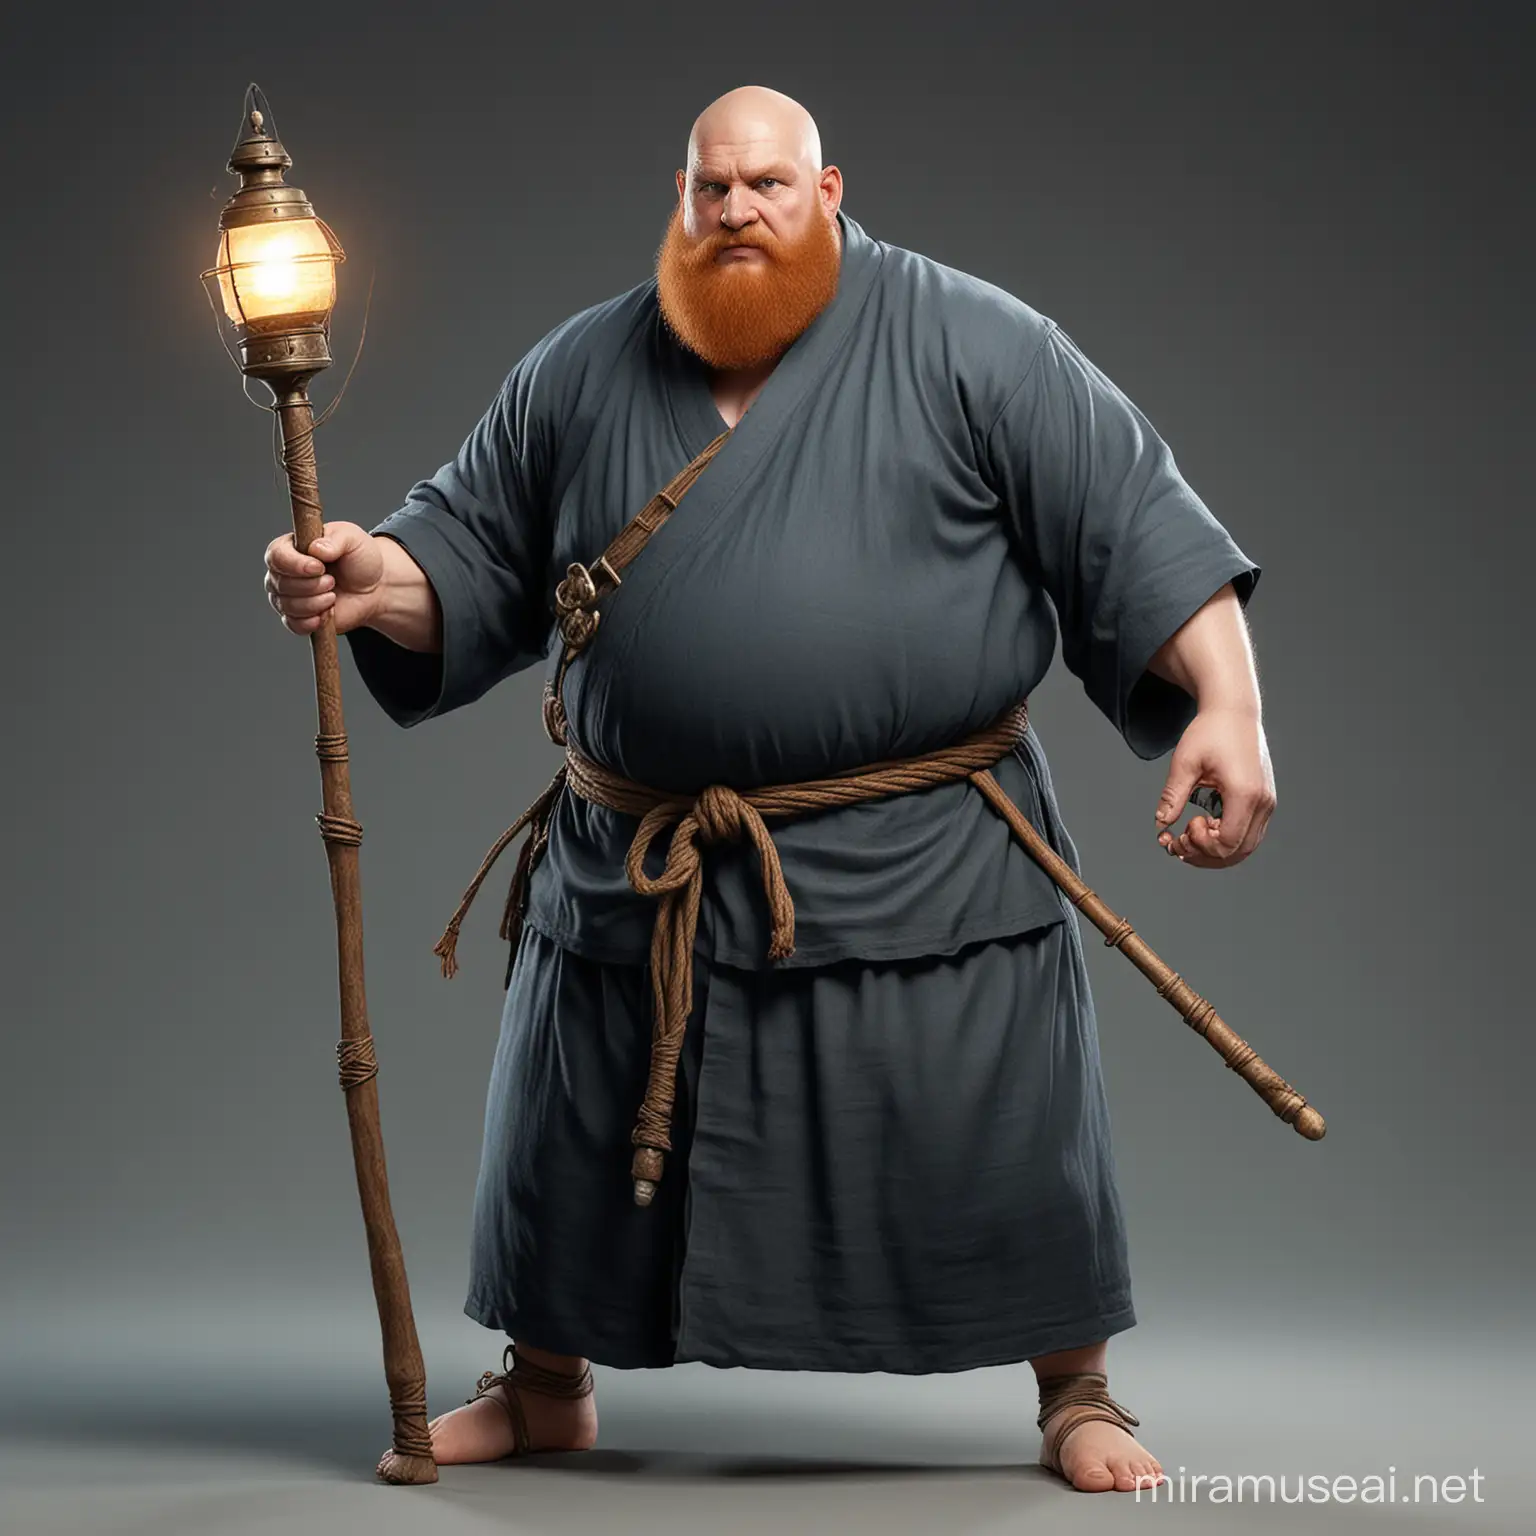 Monk, fighting stance, holding a quarterstaff, holding a lantern, very fat, obese, Bald, big ginger beard, dark Blue eyes, tall, male.
